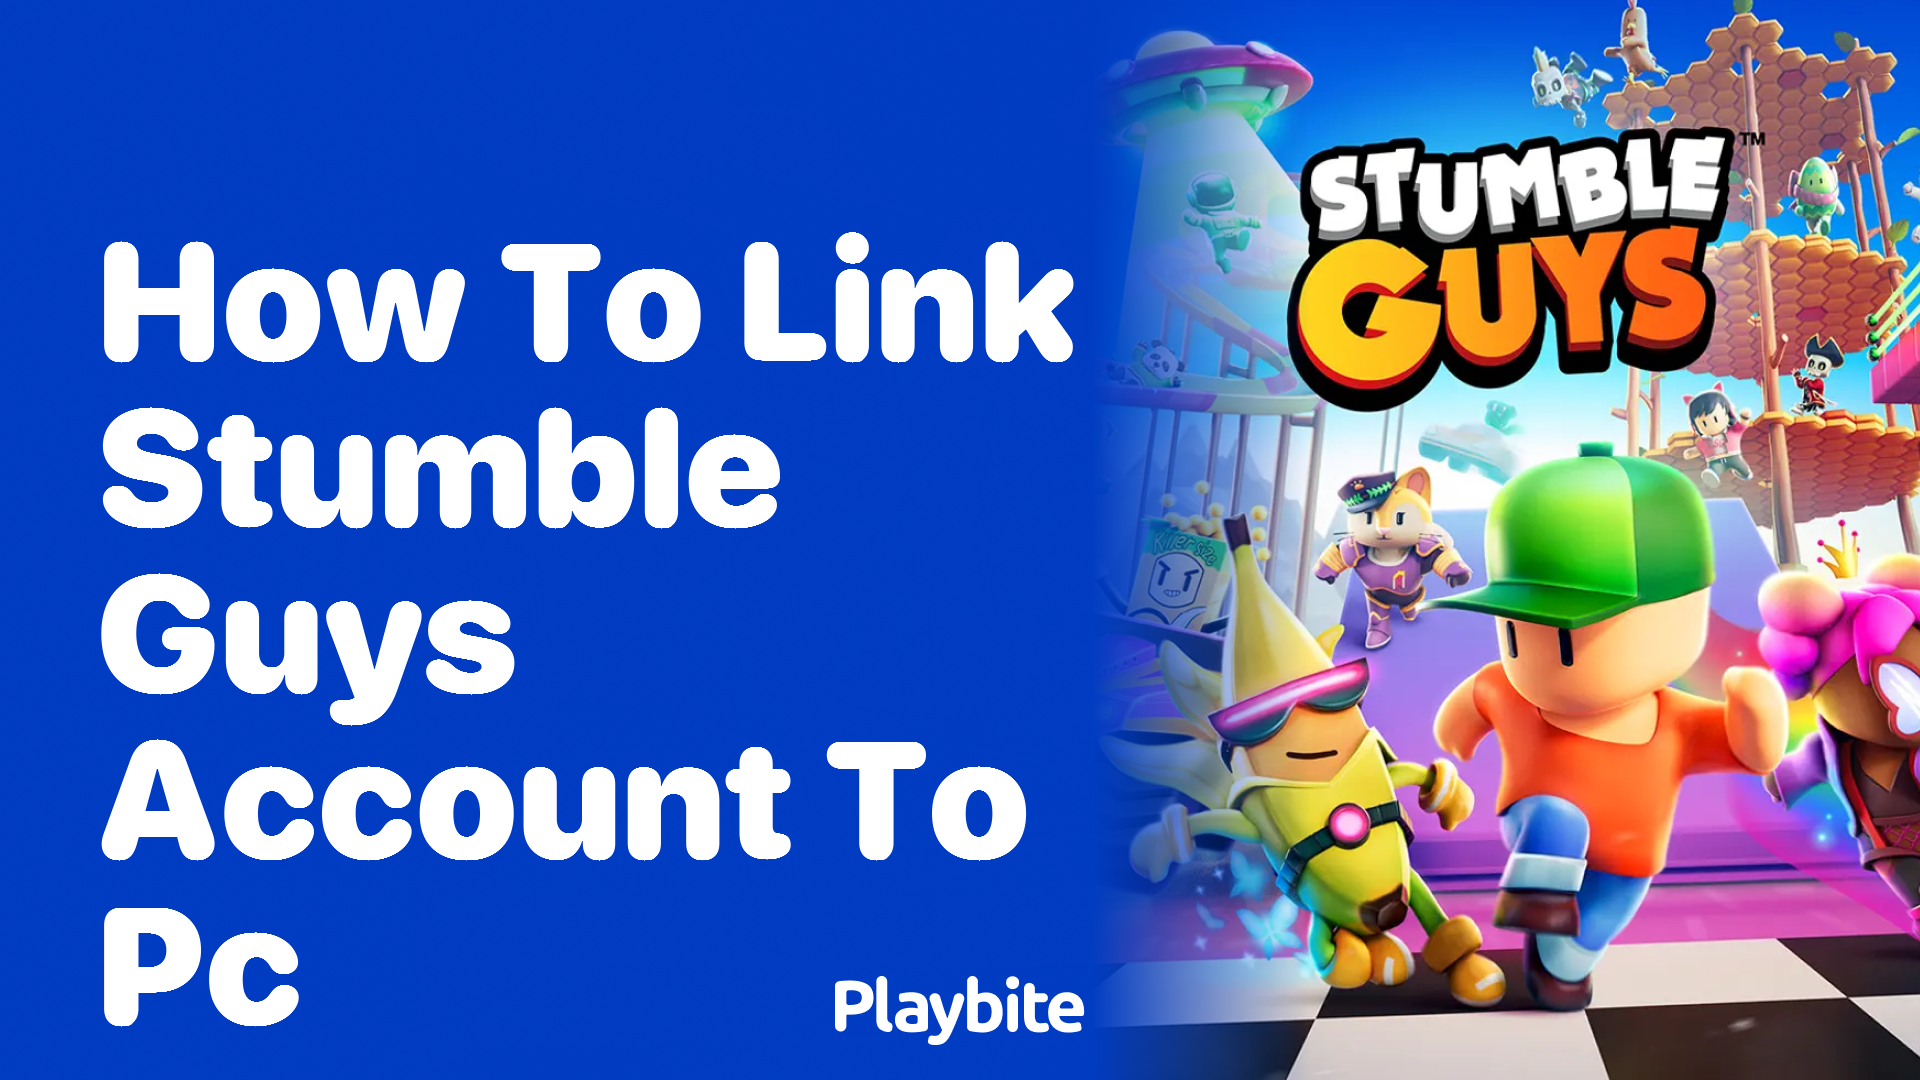 How to Link Your Stumble Guys Account to PC